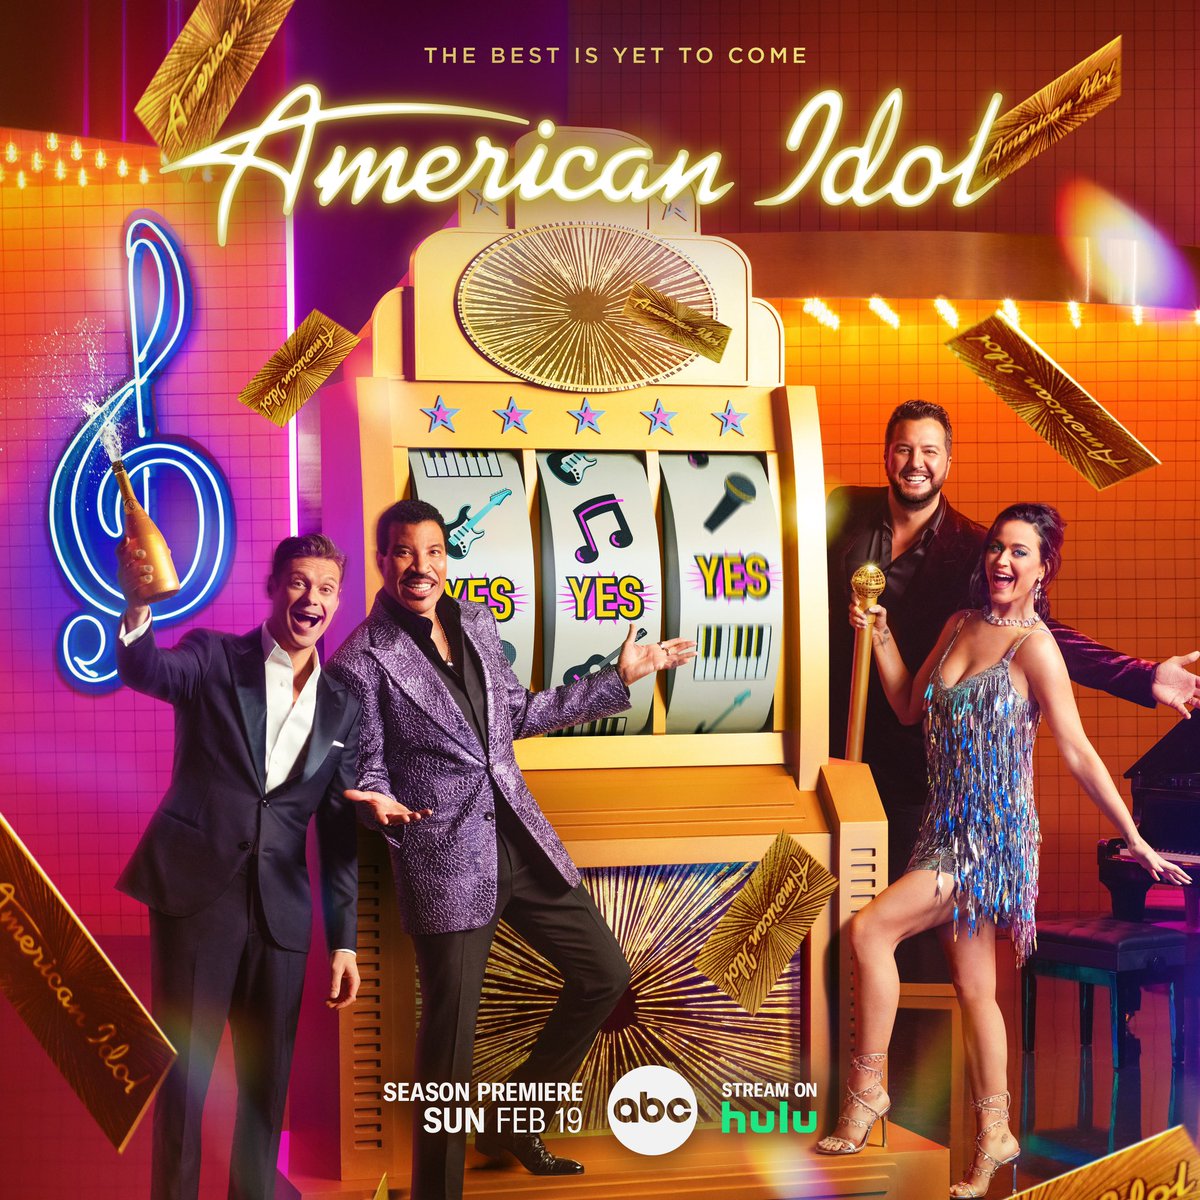 We’re about to hit the jackpot of talent this season! #AmericanIdol premieres Feb 19 on @ABCNetwork !